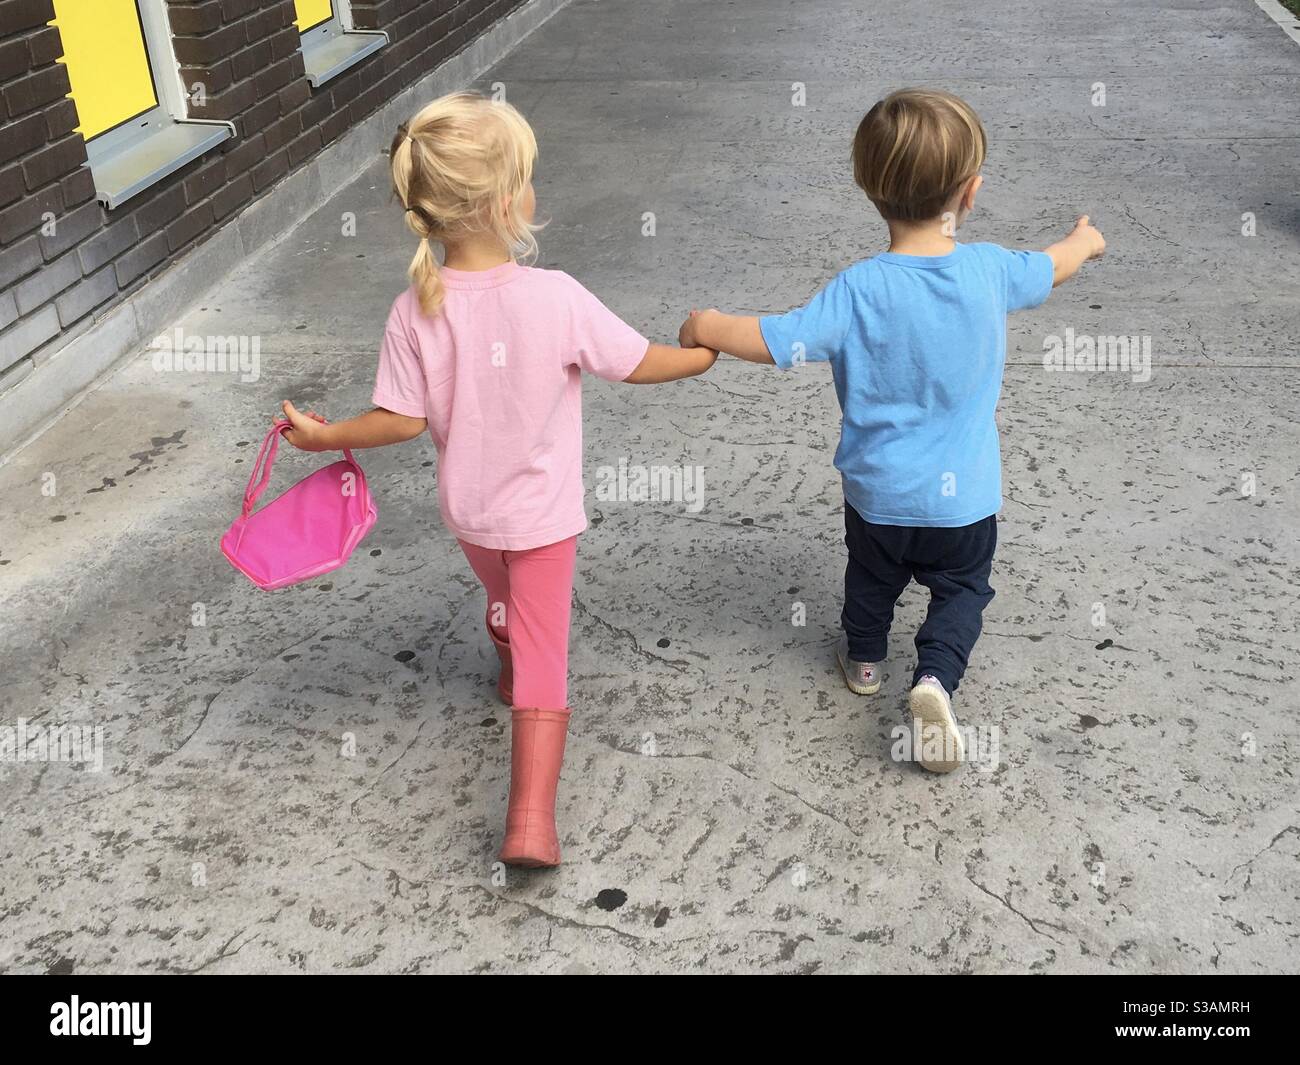 toddlers running holding hands Stock Photo